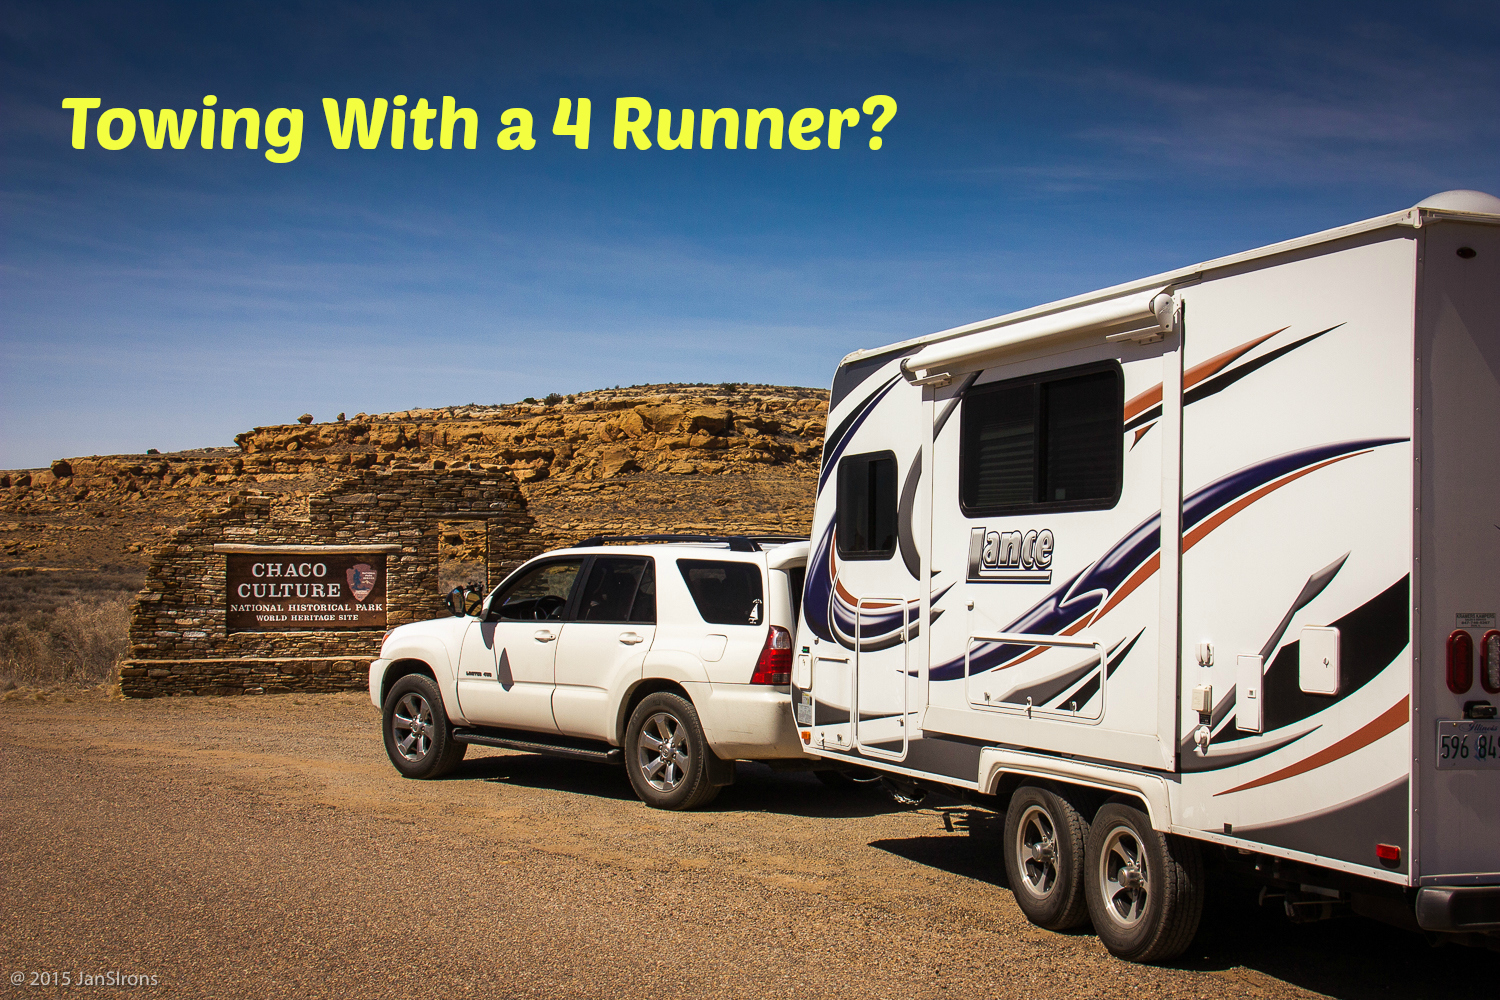 Towing A Travel Trailer With a 6 Cyl Toyota 4 Runner? - Trailer